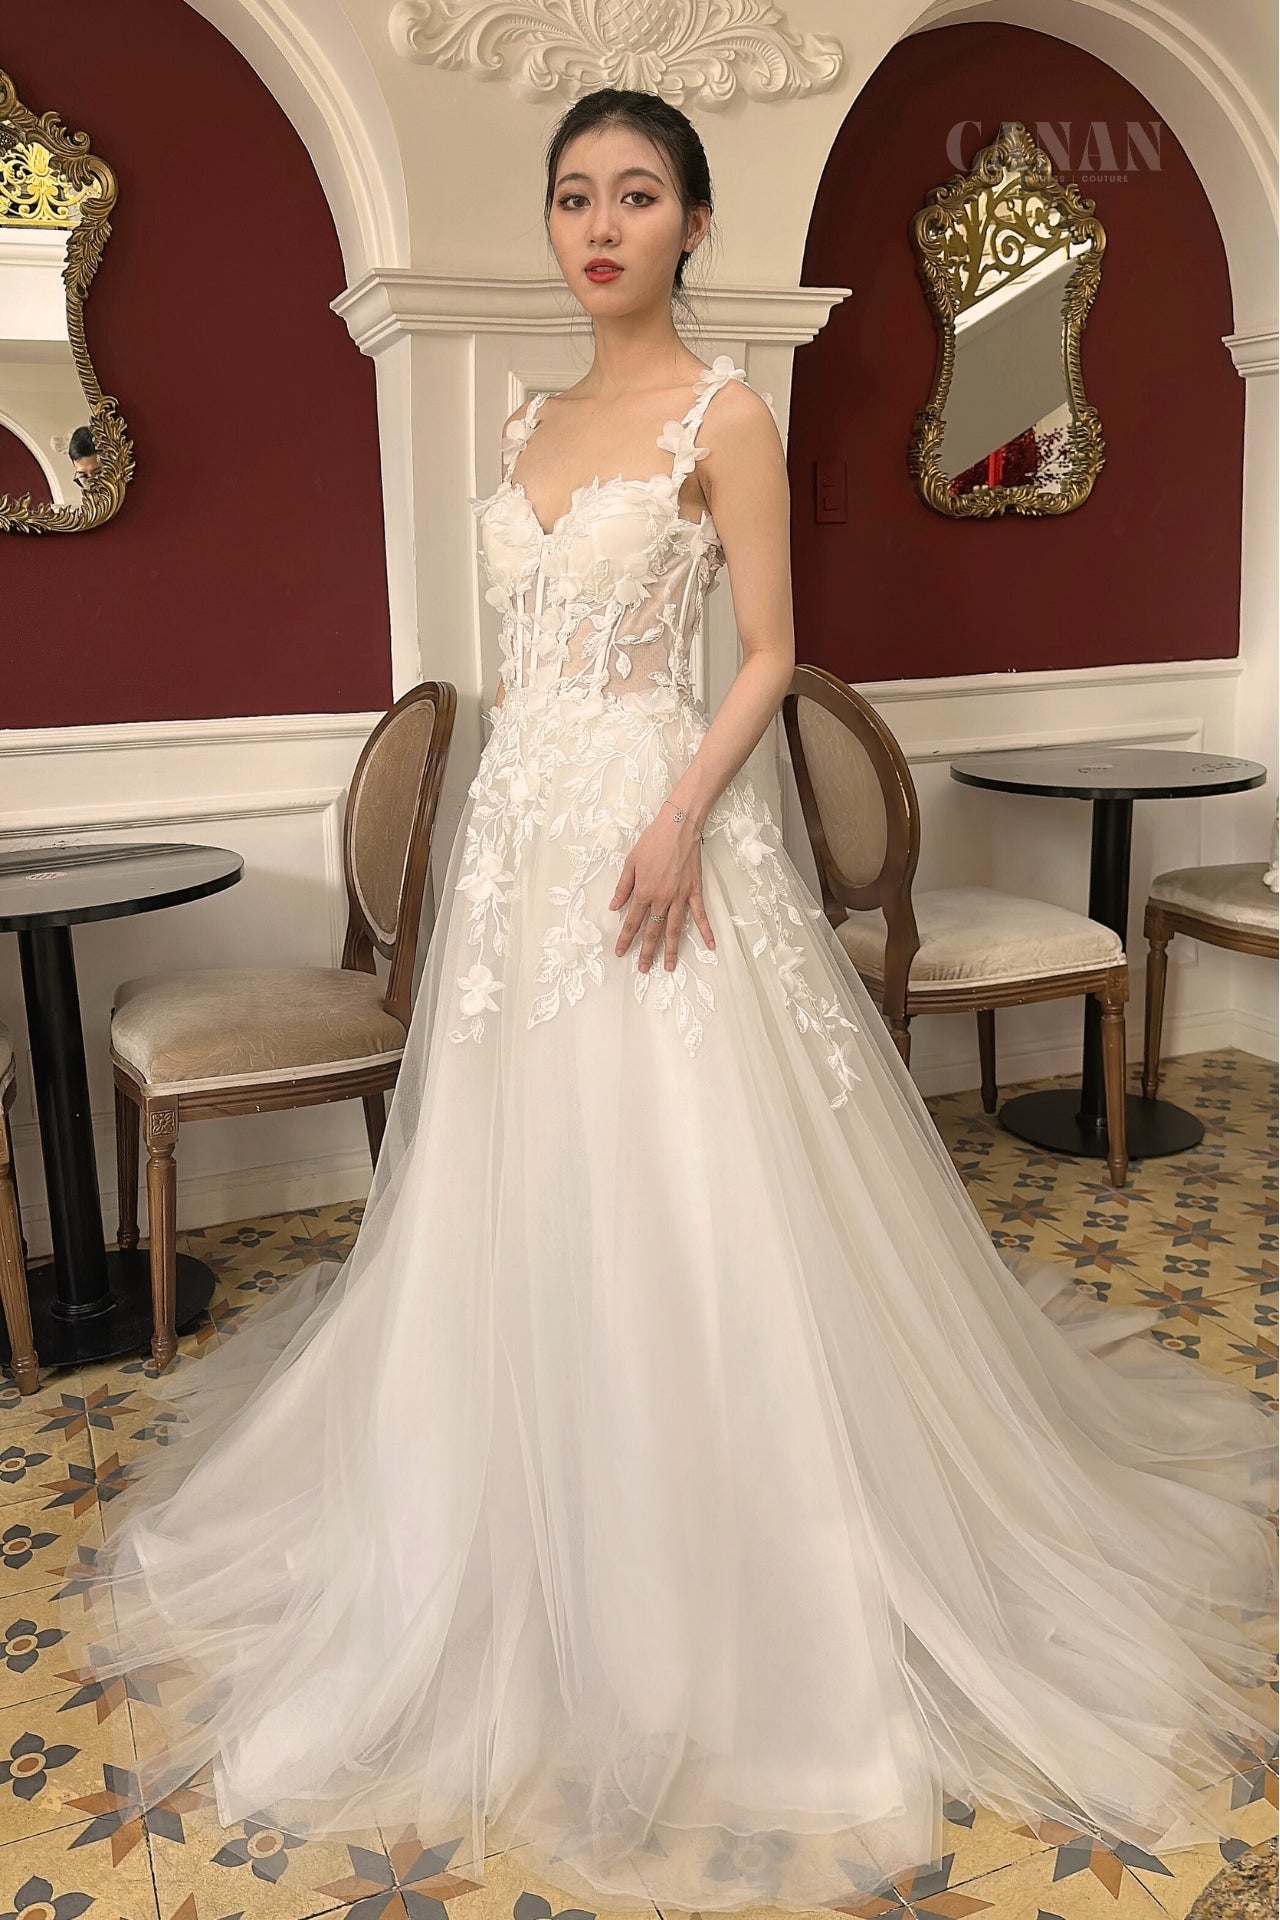 Jolie - Romantic Splendor: Corset A-Line Wedding Dress in Delicate Flower Lace and Tulle Fabric